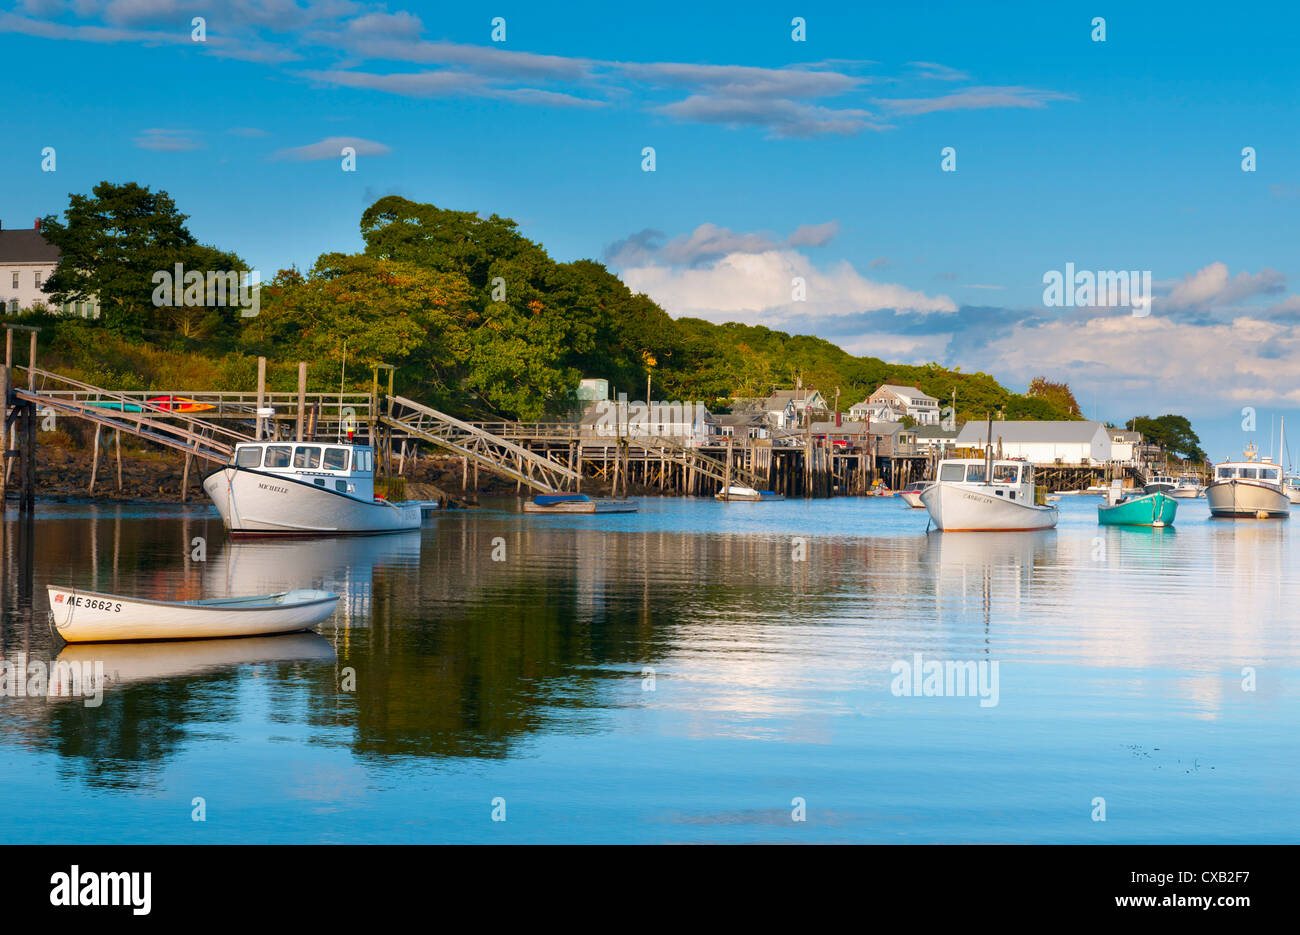 Lobster fishing boats and jetties, New Harbor, Pemaquid Peninsula, Maine, New England, United States of America, North America Stock Photo